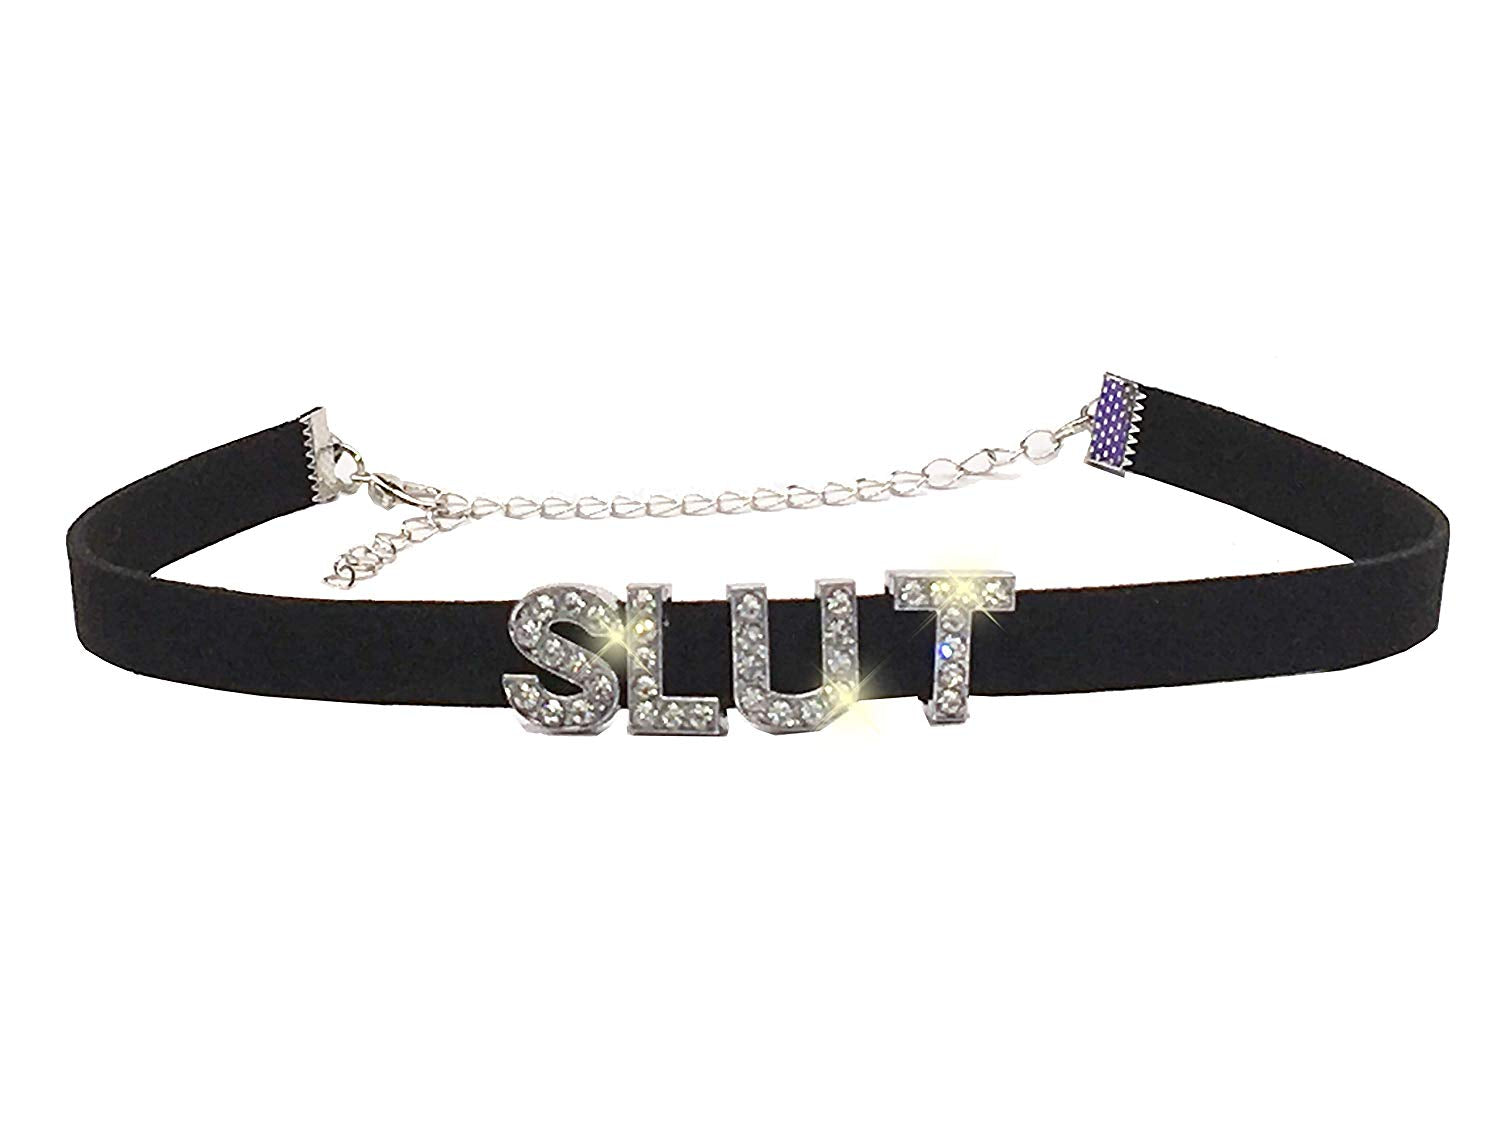 Slut Rhinestone Choker Necklace DDLG Daddys Owned Submissive BDSM pic